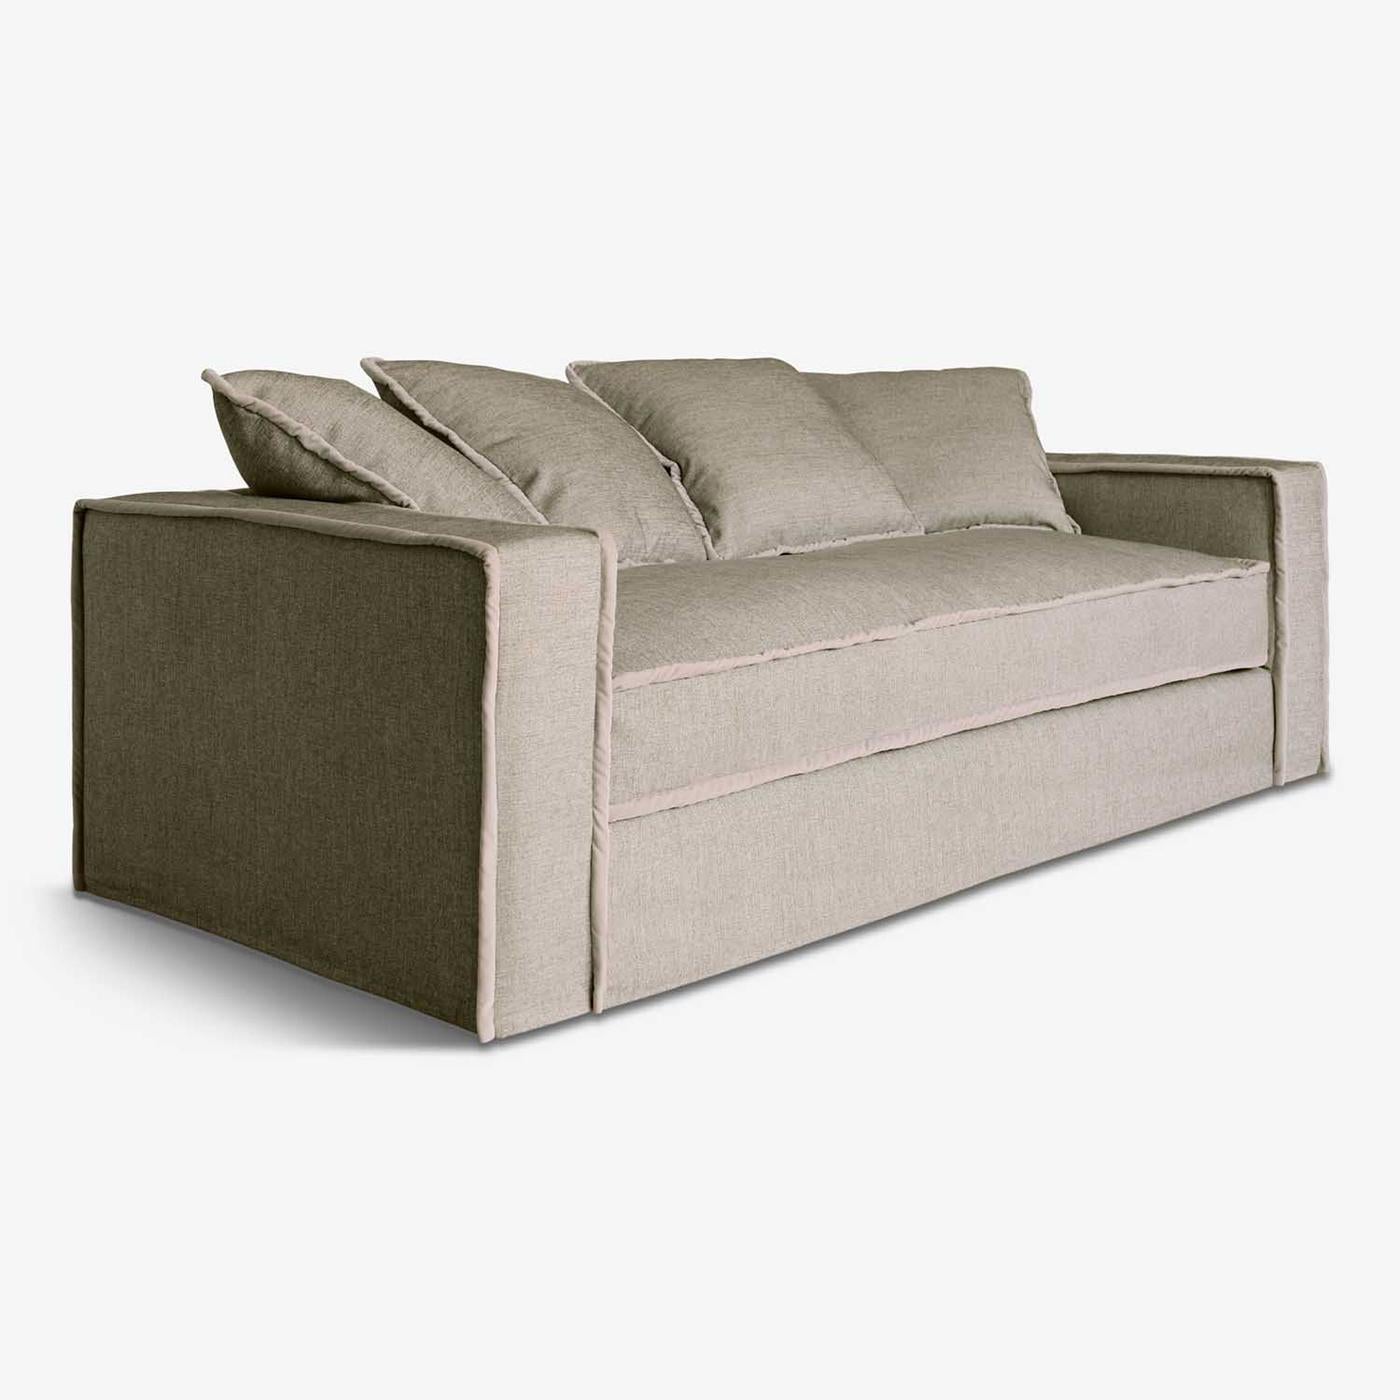 This sofa is smooth to the touch and ultra-comfortable. The deep seats and soft fabric make sinking in true pleasure. Rafaella’s angular profile gives this revival style a modern twist, and its plush cushions add comfort and a charming contrast.